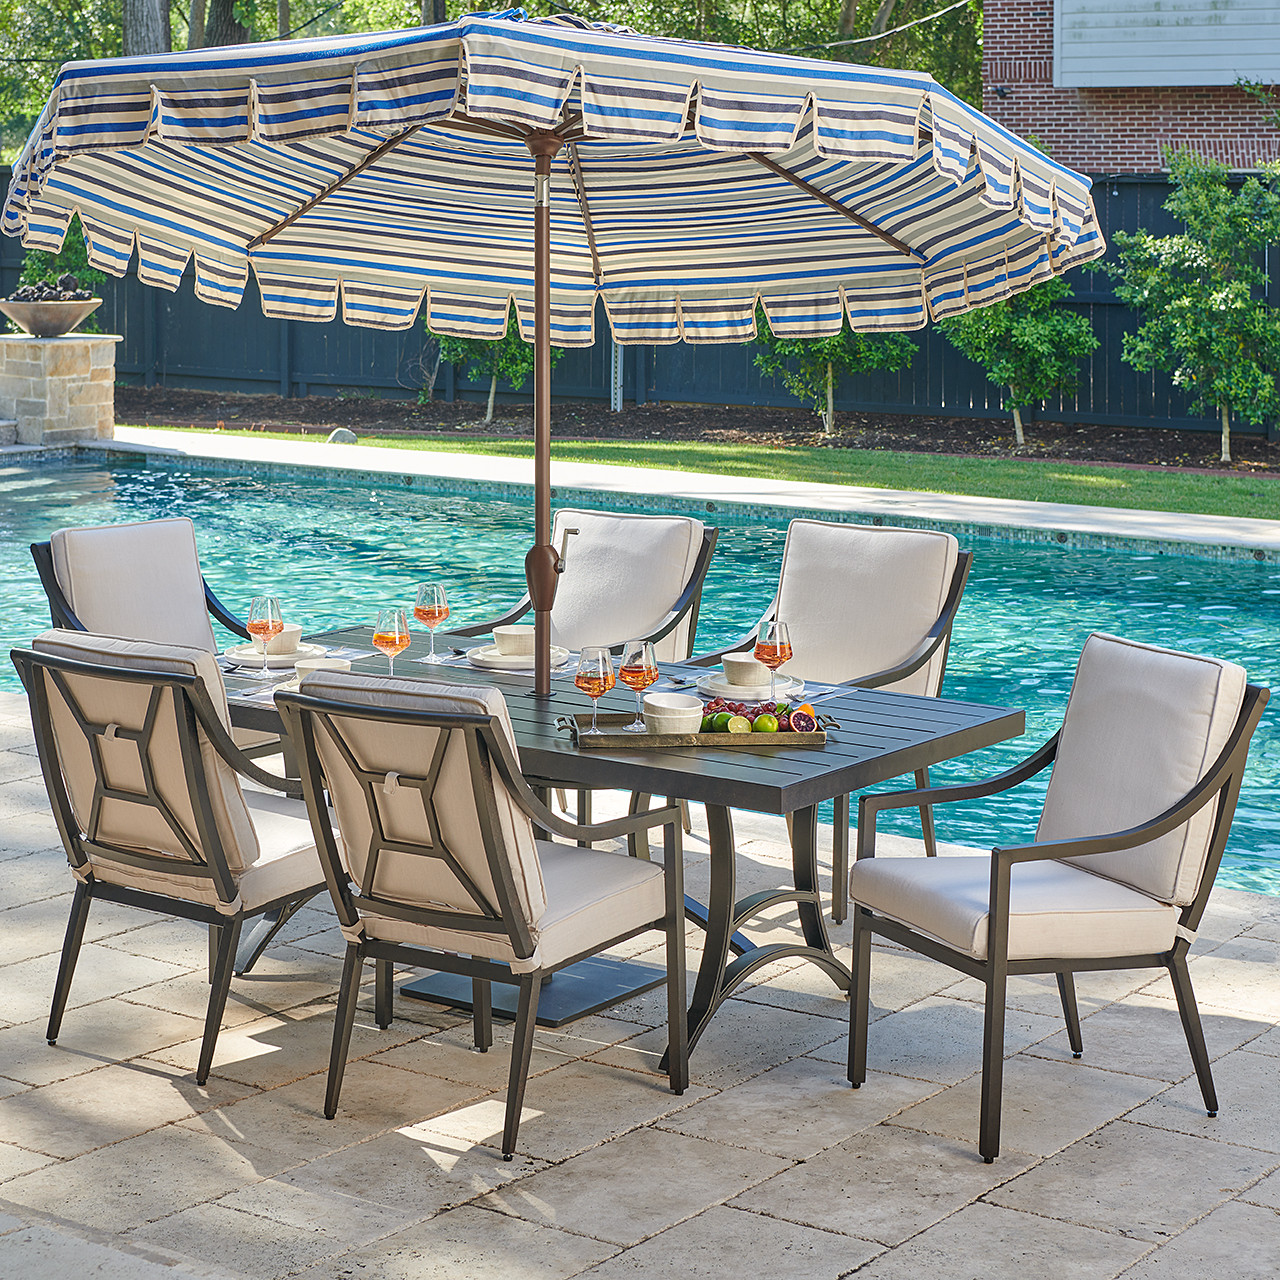 Hill Country Aged Bronze Aluminum with Cushions 7 Piece Dining Set + 84 x 42 in. Table